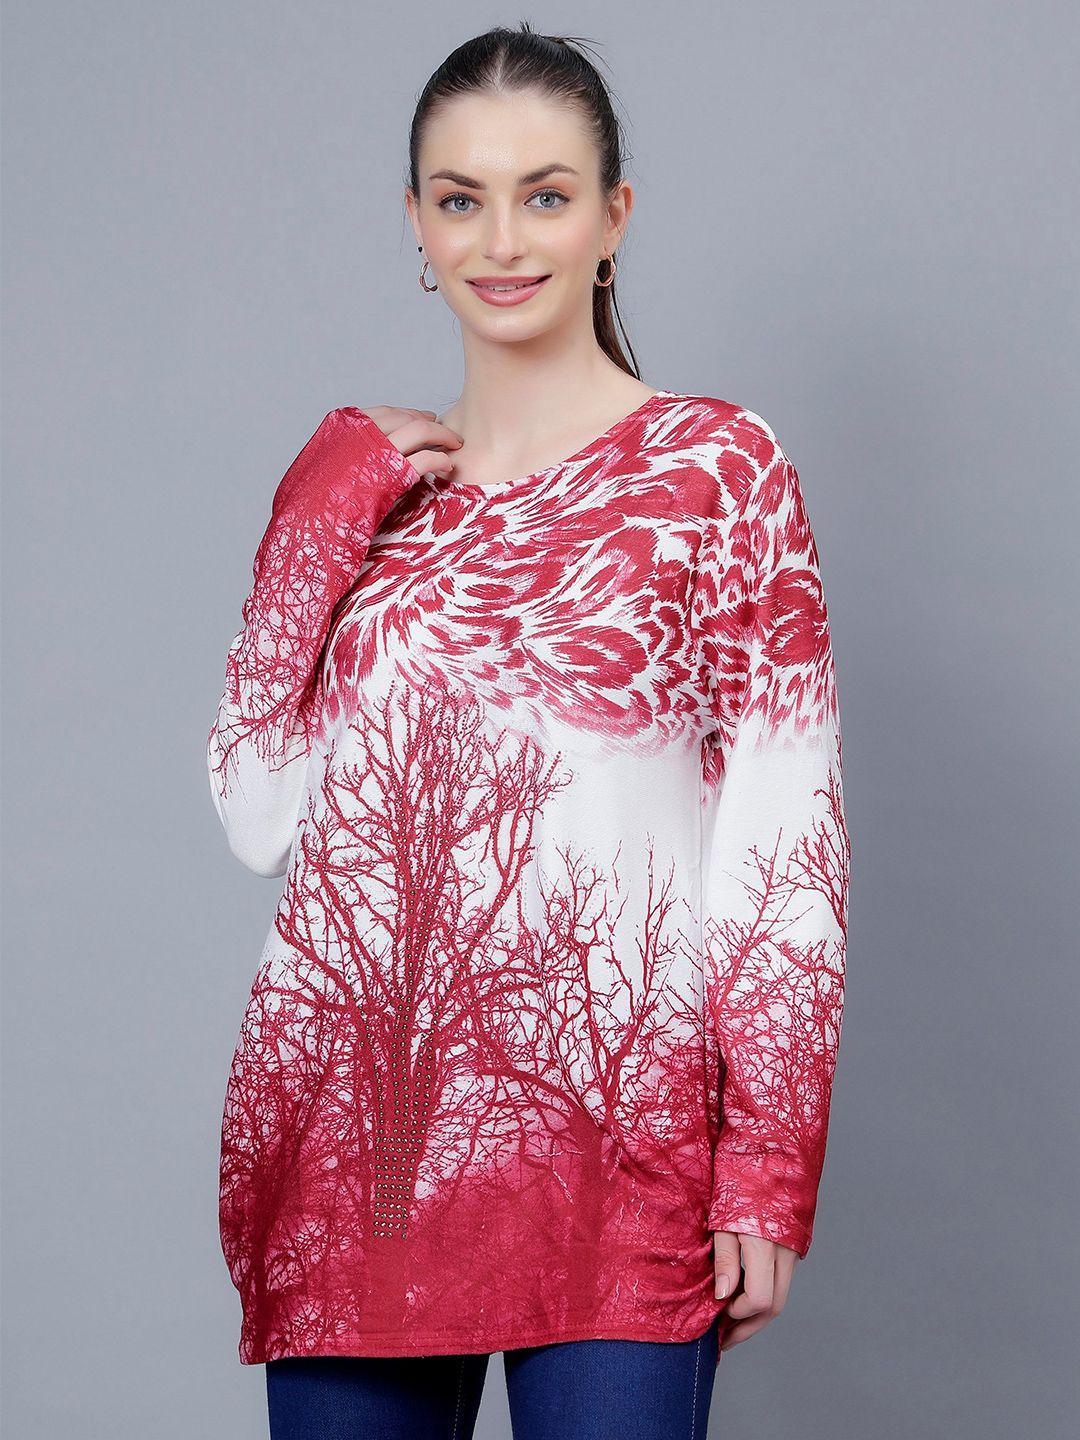 albion conversational printed round neck long sleeve tops